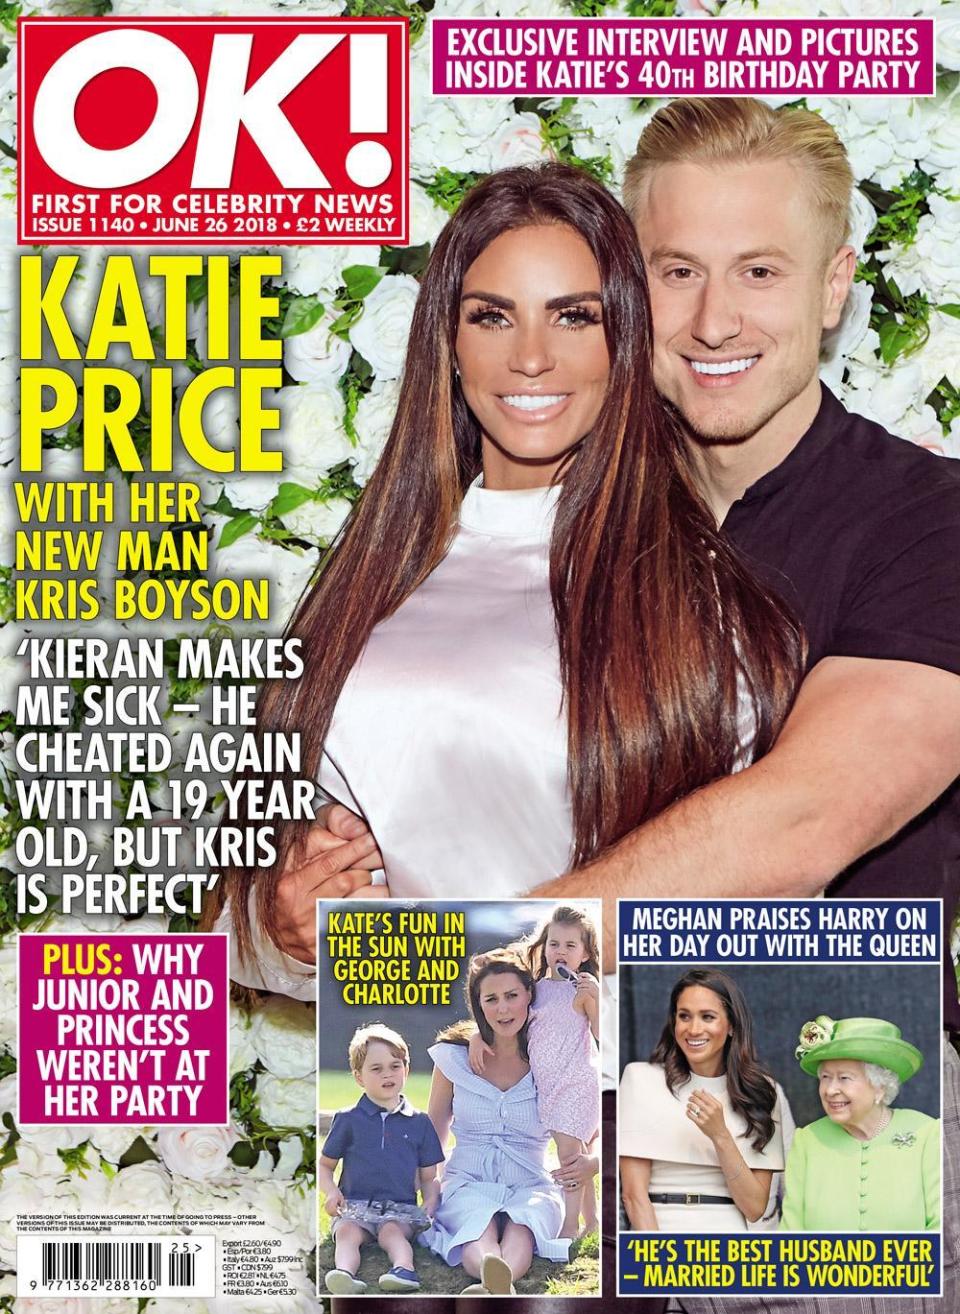 Cover stars: Katie Price and Kris Boyson have gone public with their relationship